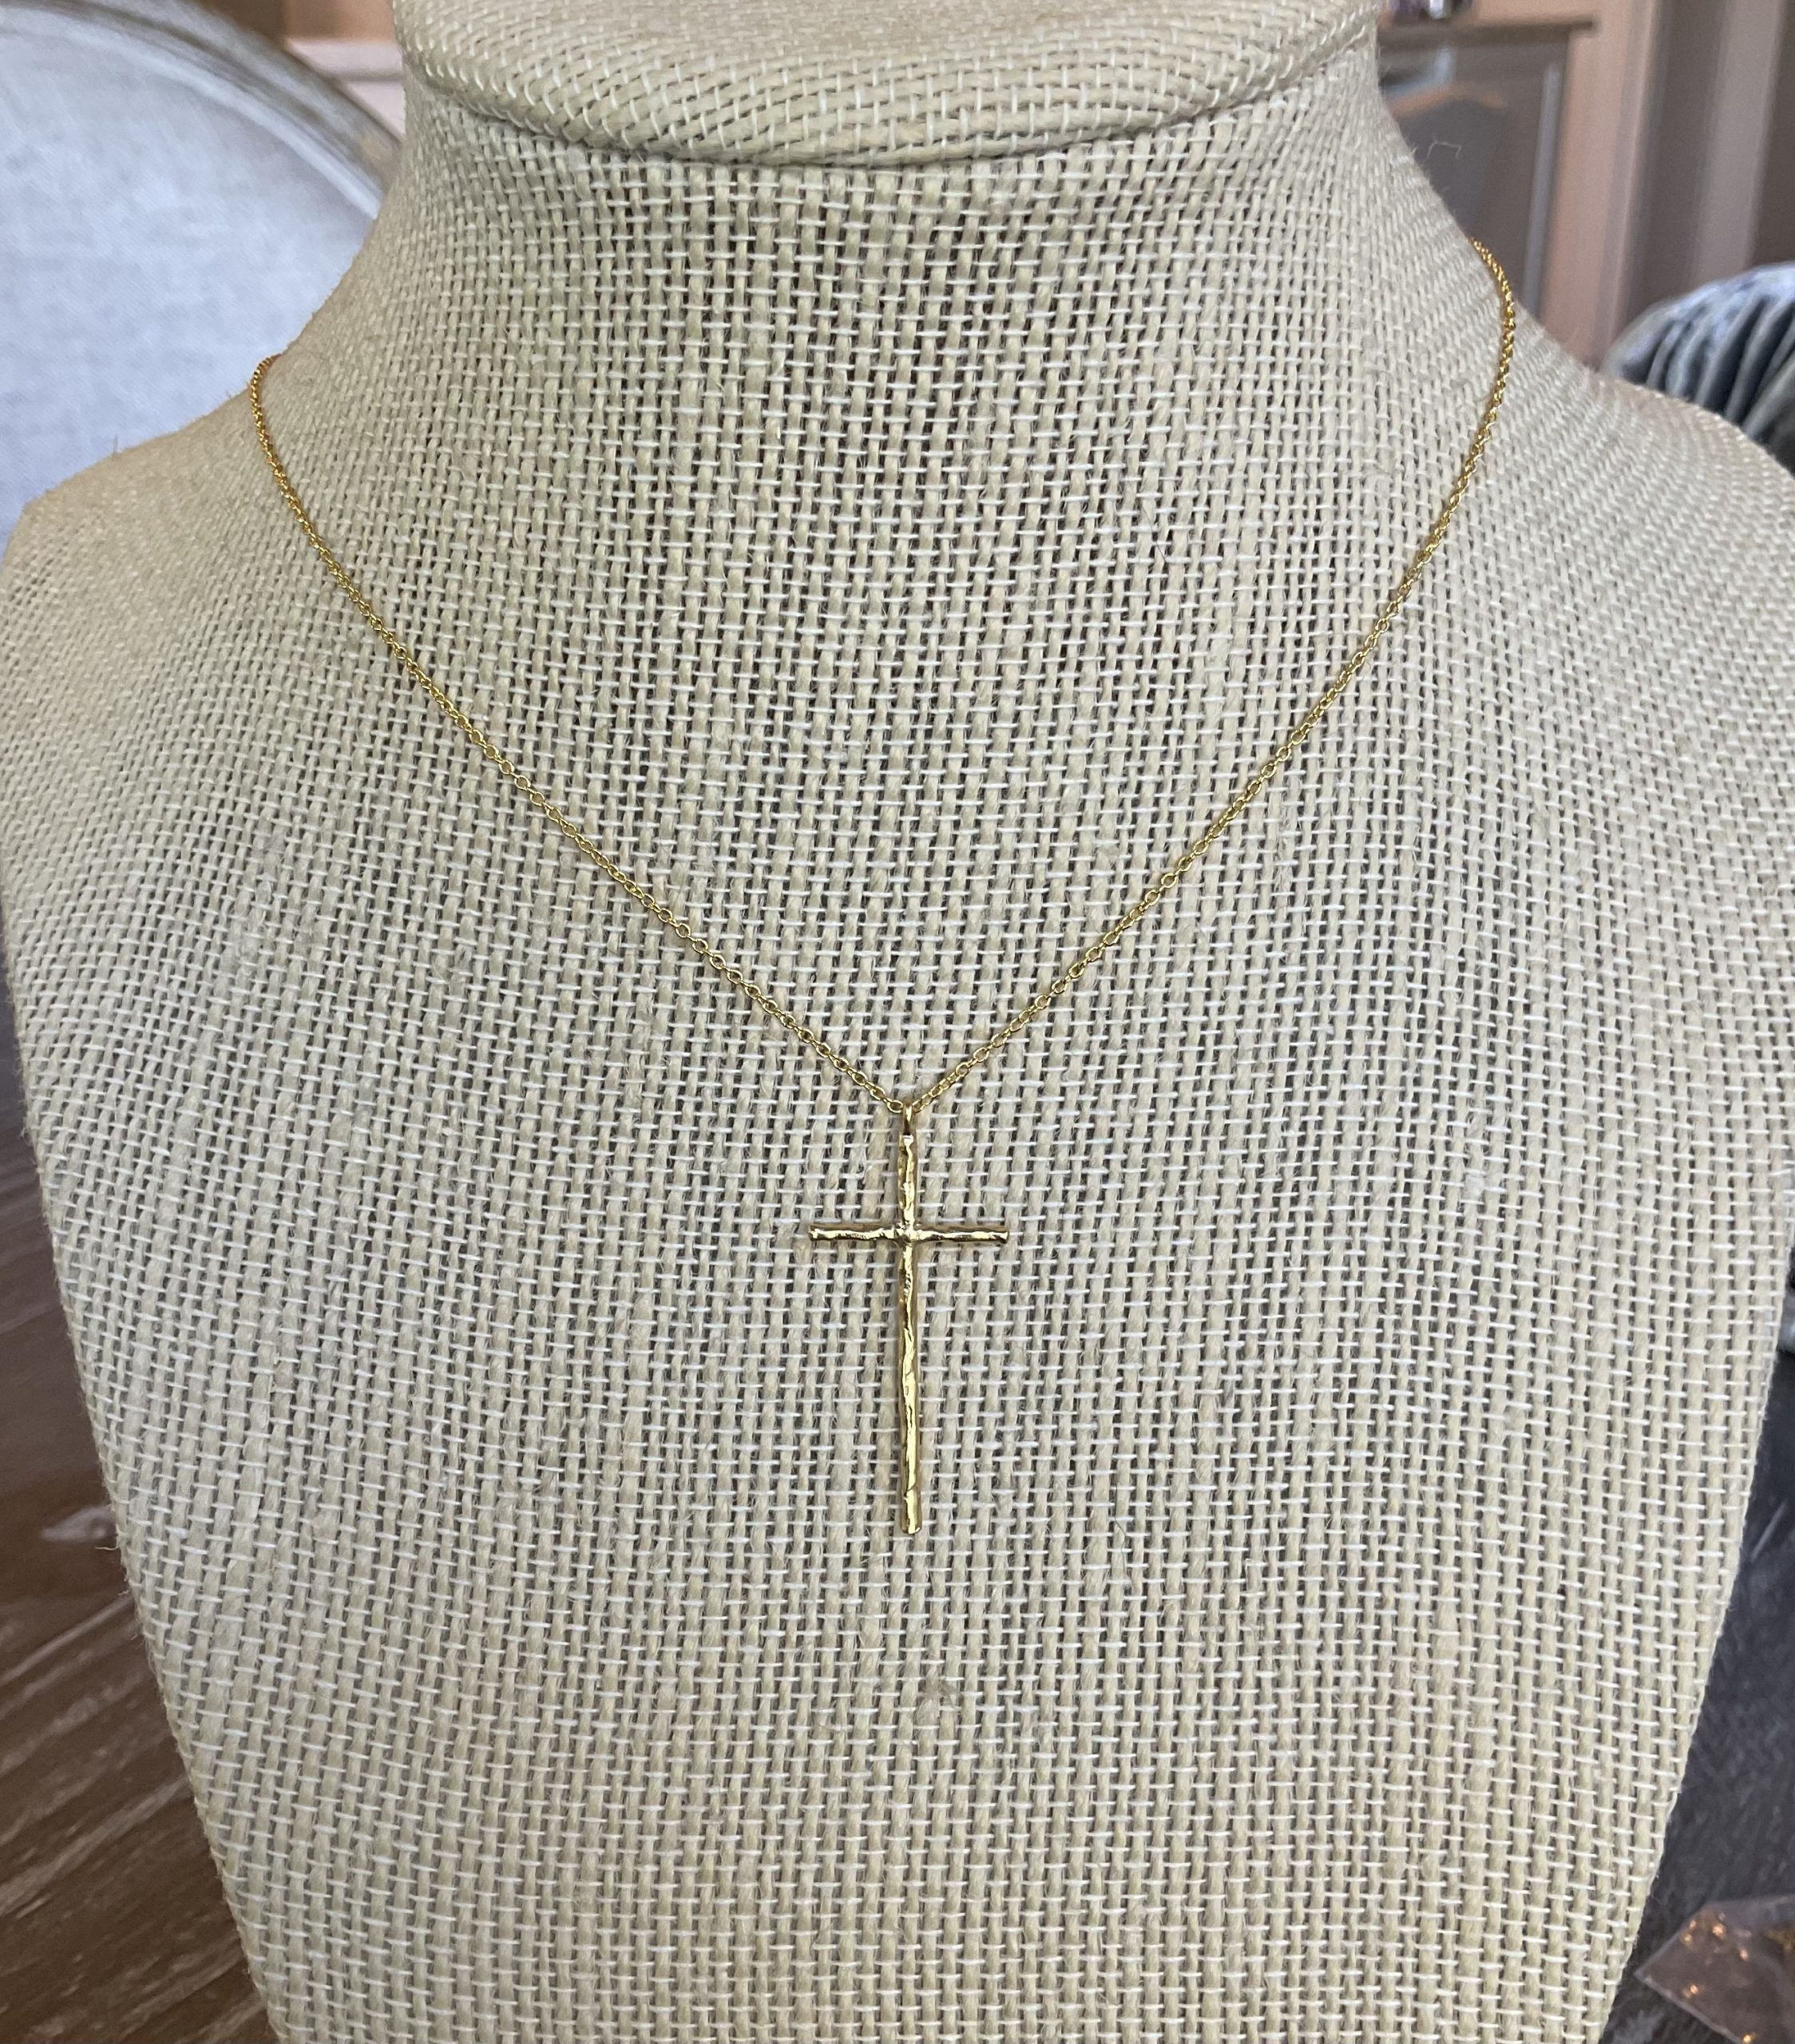 Thin Cross Necklace